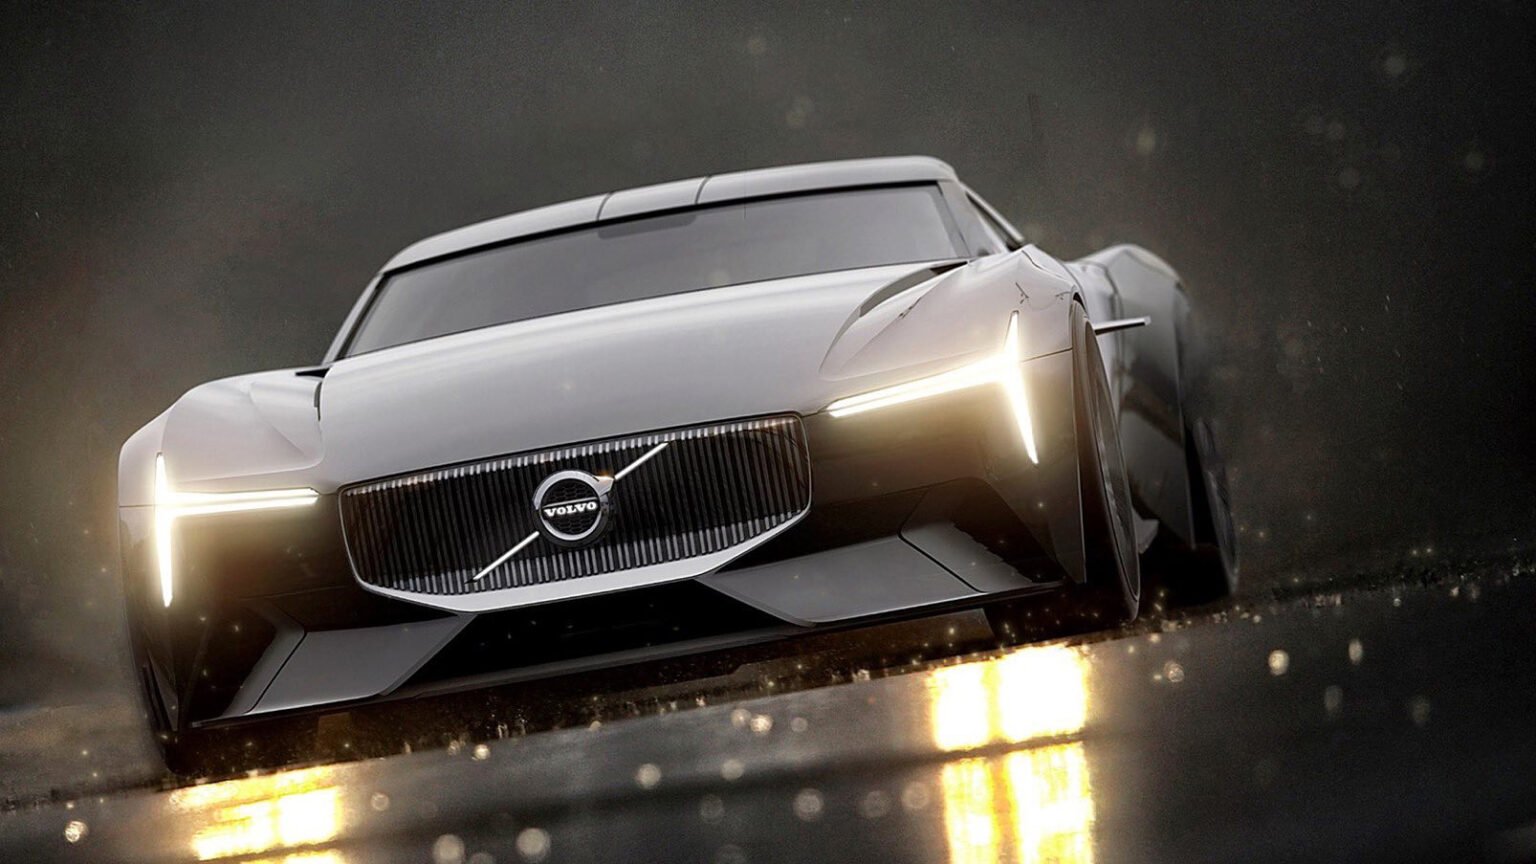 Meet Volvo’s Vision Gran Turismo Concept That Never Happened